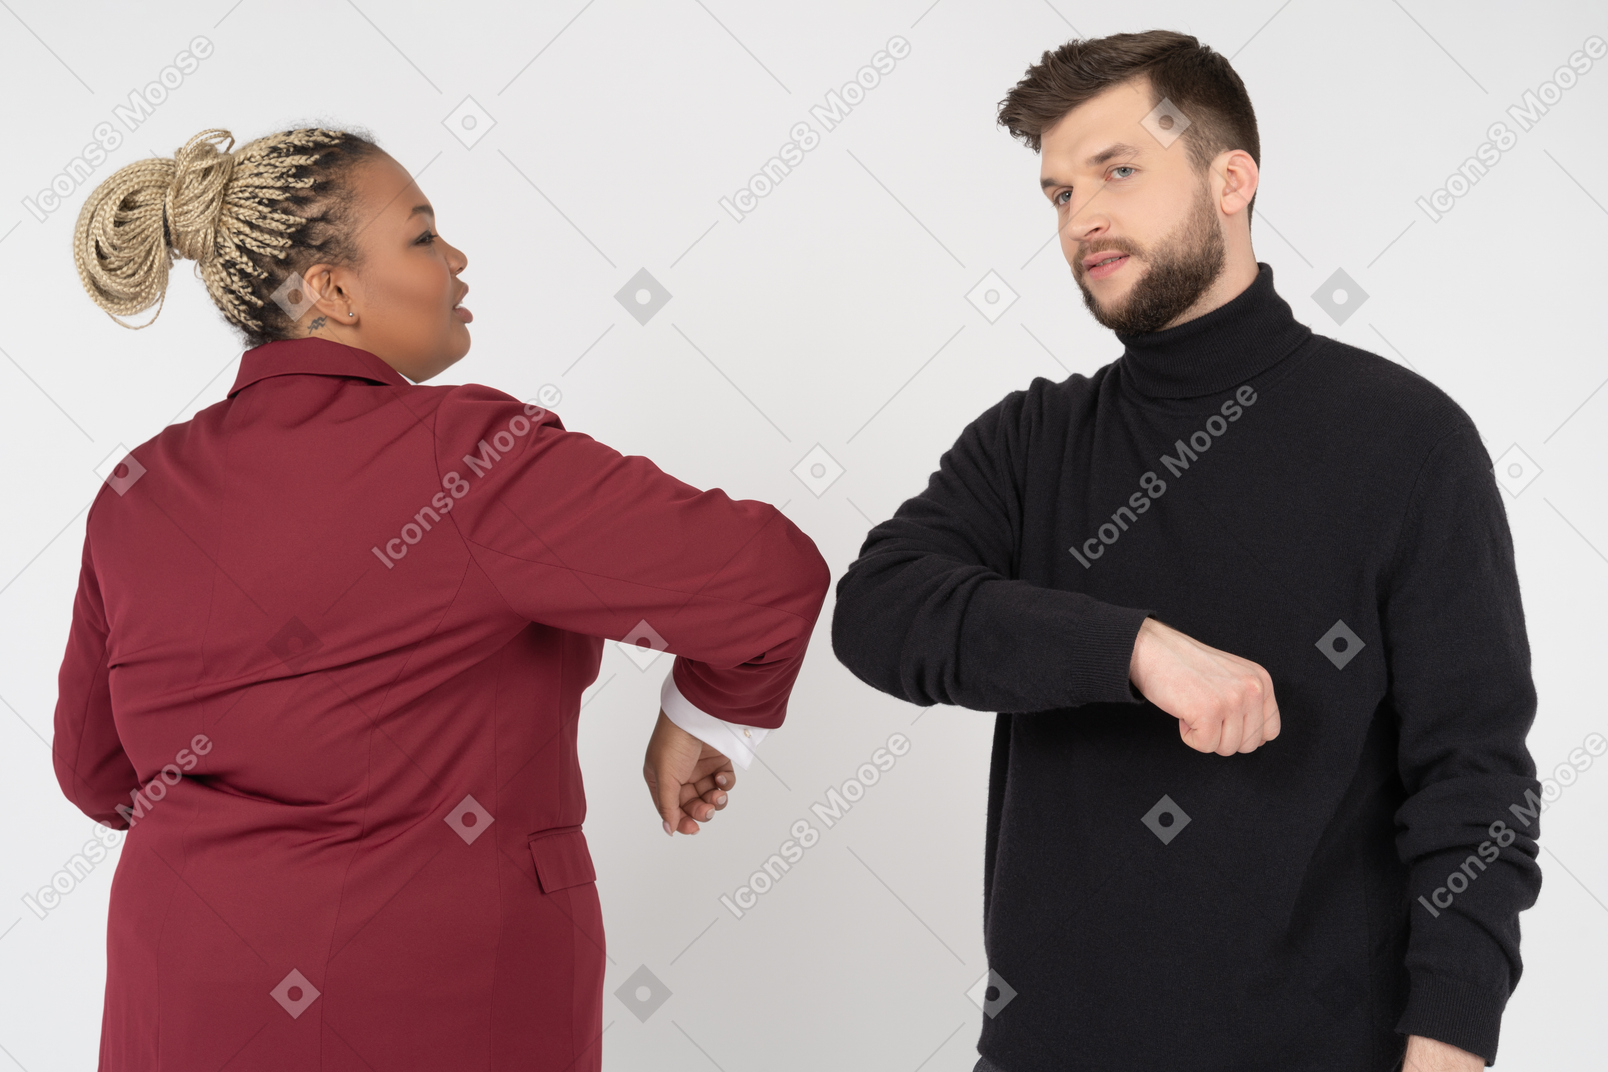 Colleagues greeting each other with elbow bump